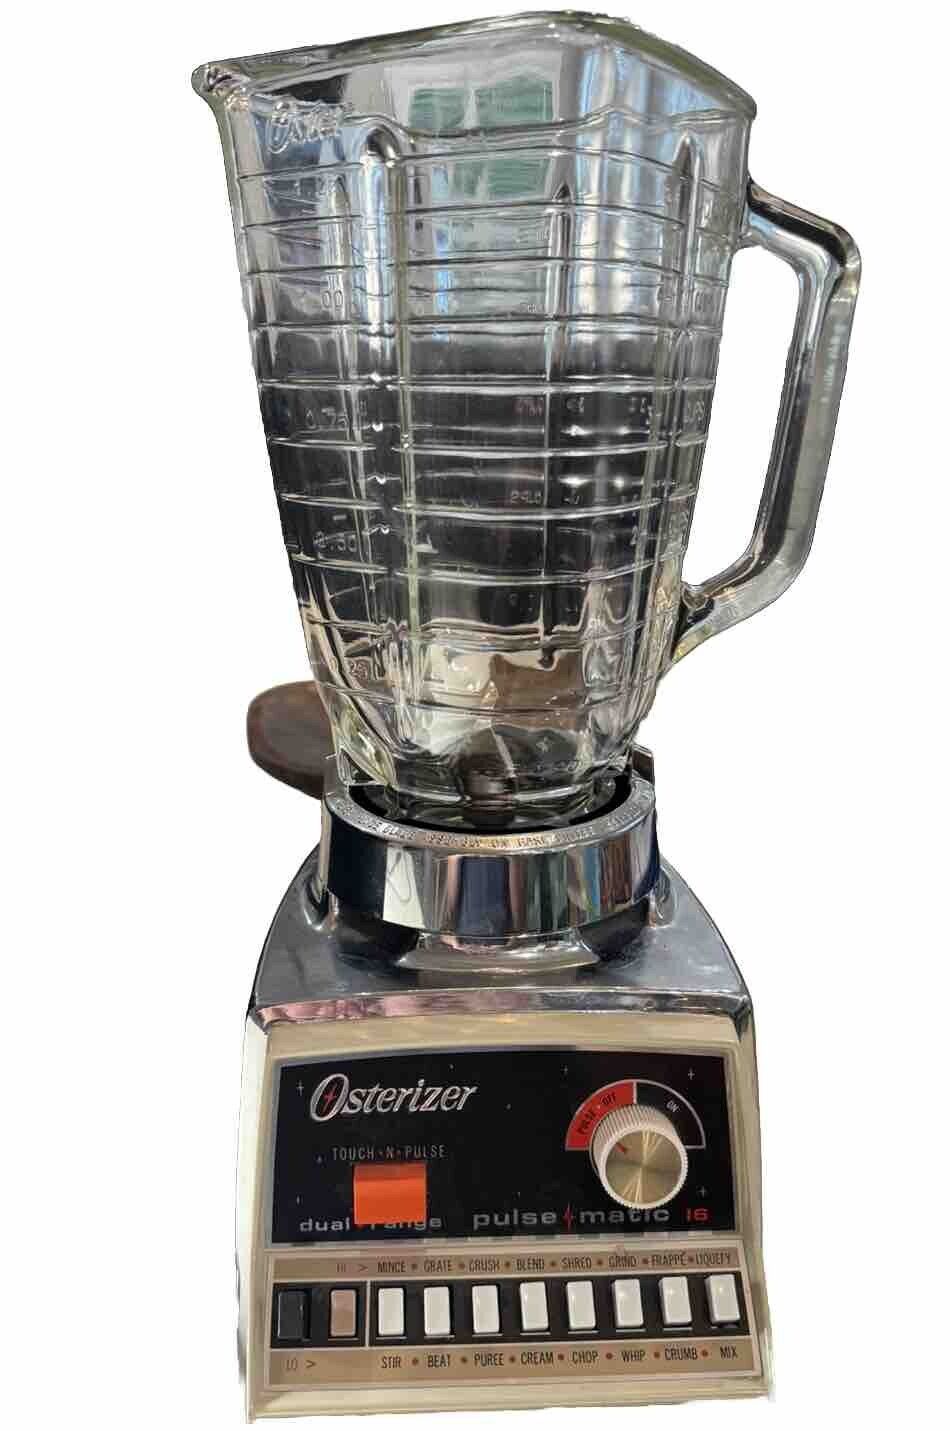 Osterizer Galaxie Dual Range Pulse Matic 16 Vintage Blender With Glass Pitcher 